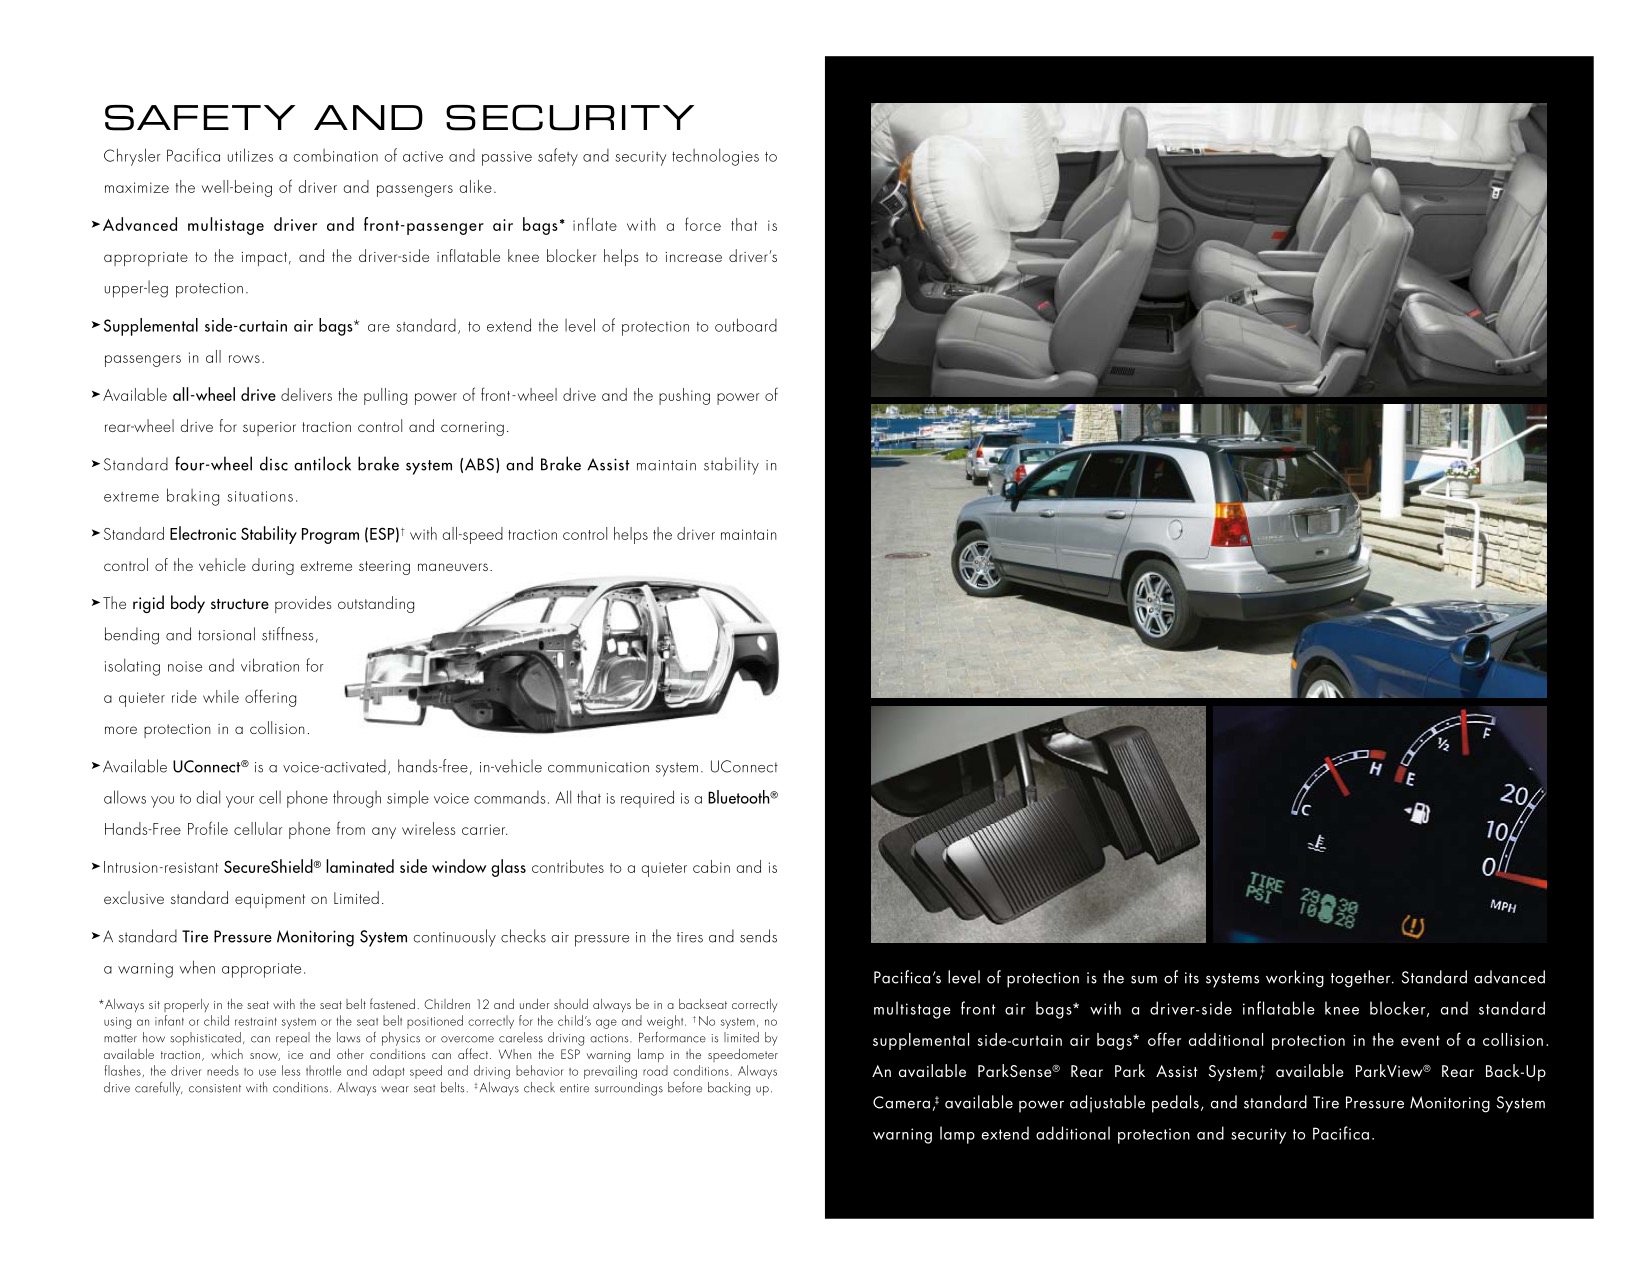 2008 Chrysler Pacifica Brochure Page 2